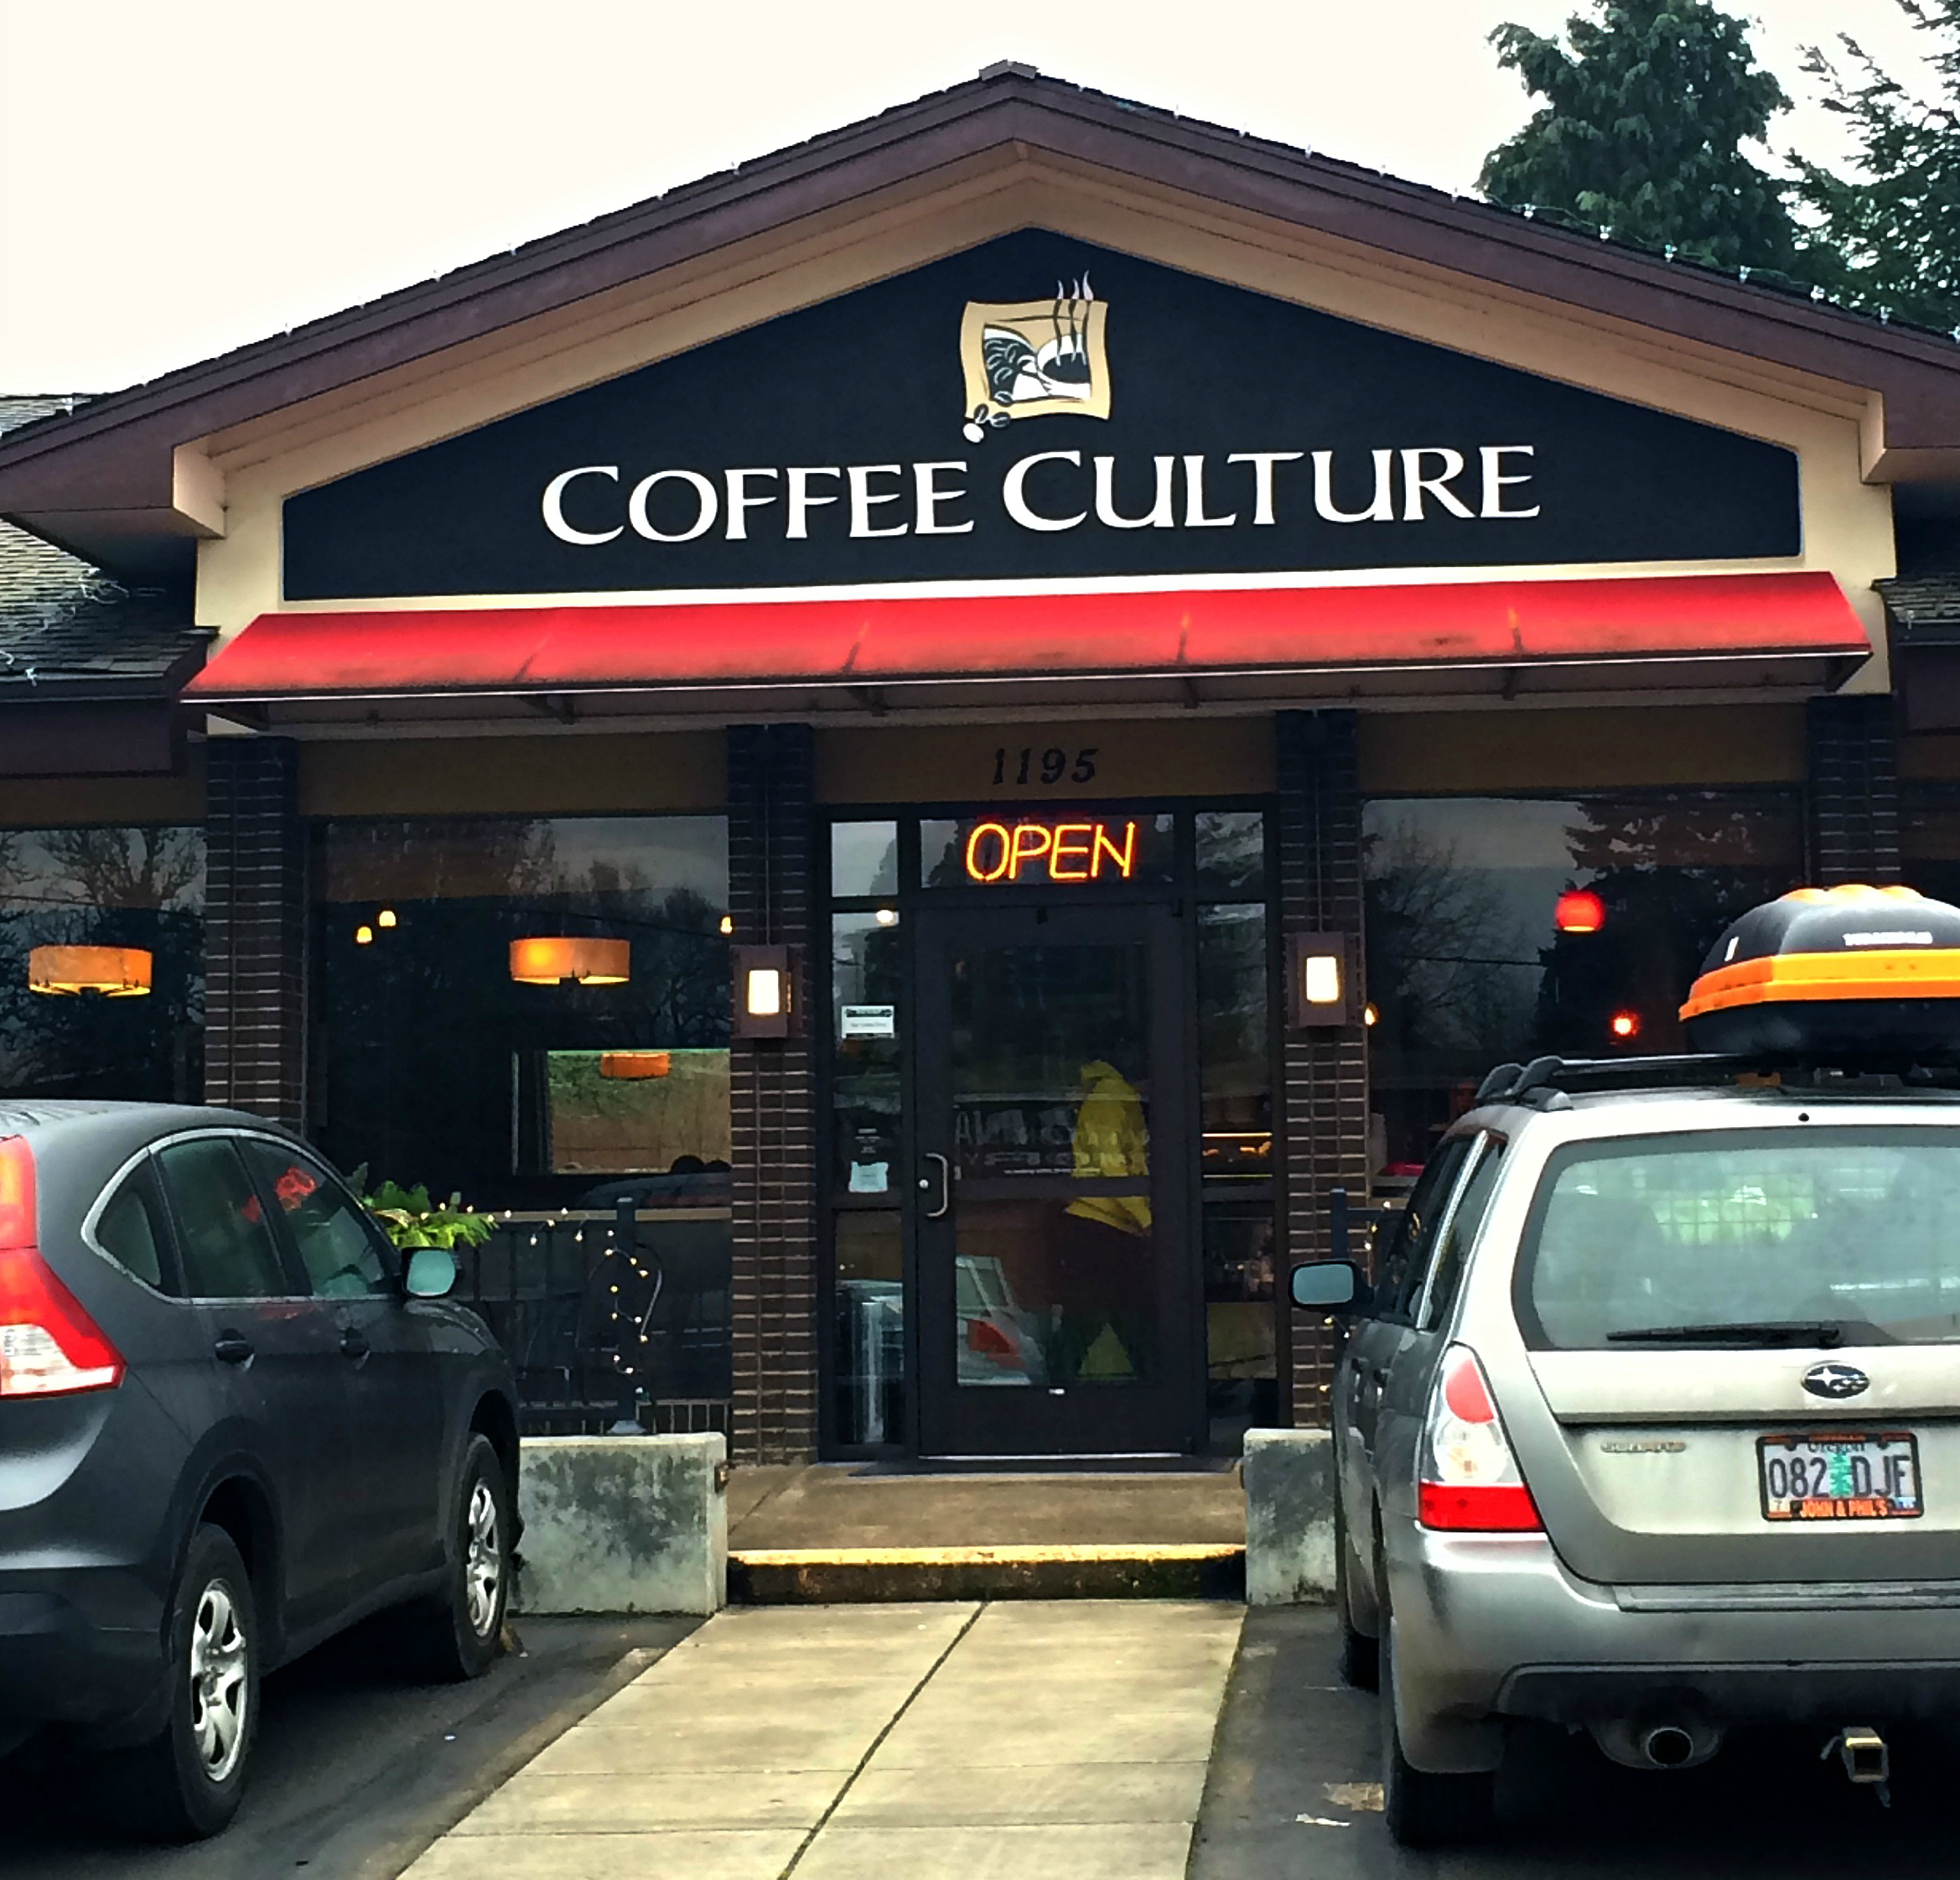 Coffee Culture has four locations in Corvallis. This one is at Kings Blvd.